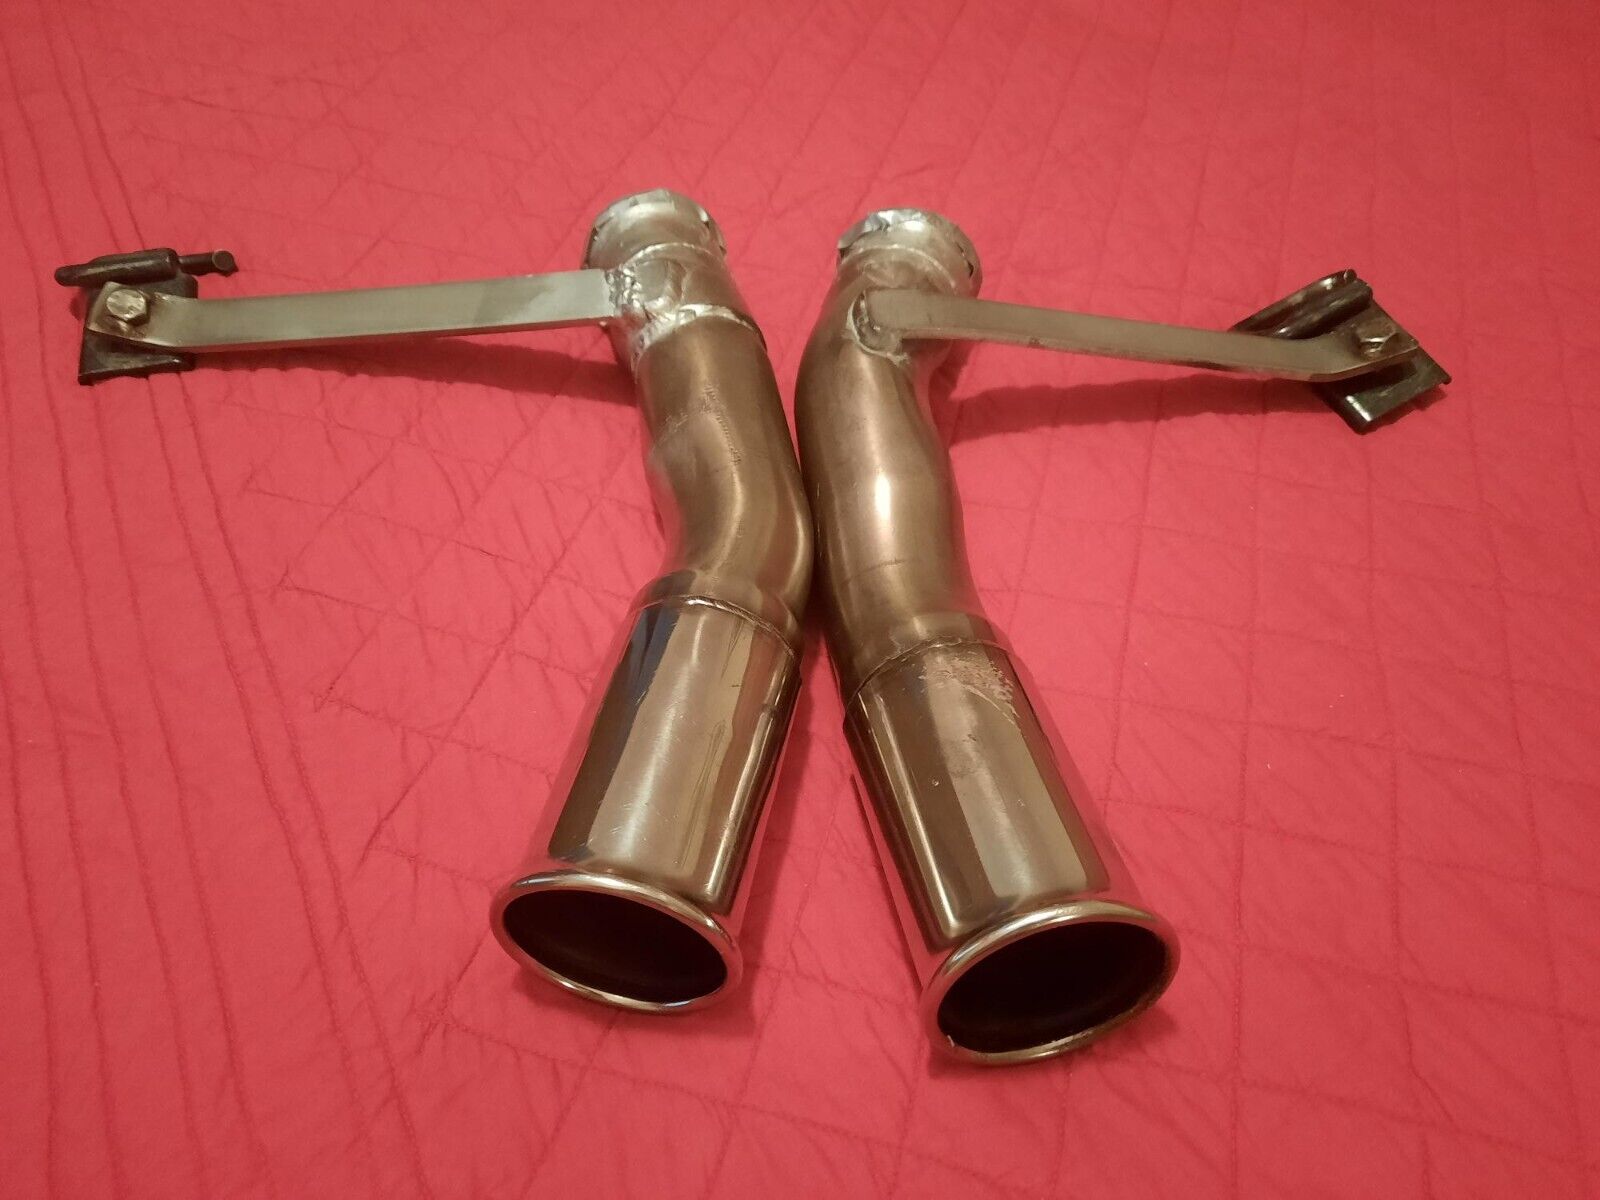 1997-1998 Lotus Esprit V8 Side Mount Stainless Steel 76mm Tailpipe Tips Used